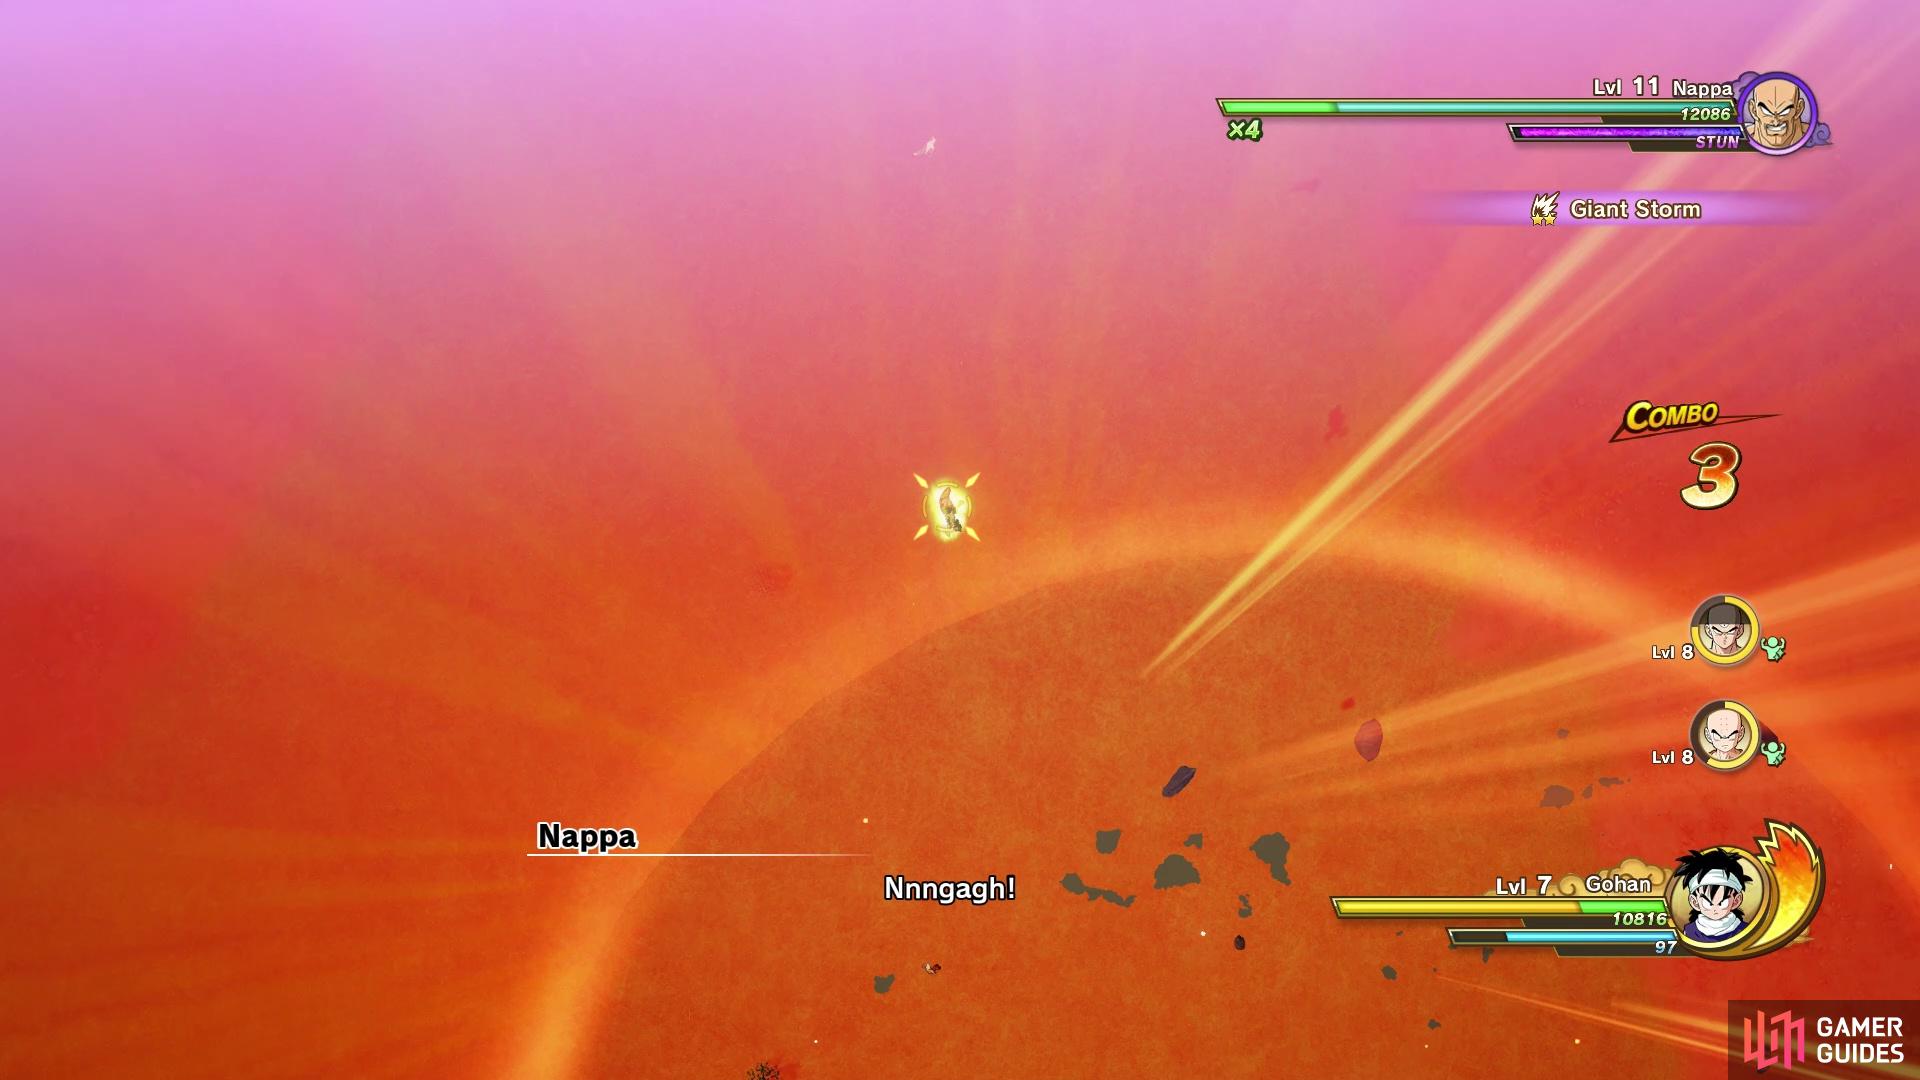 Get out of the range for Giant Storm before Nappa actually performs the move